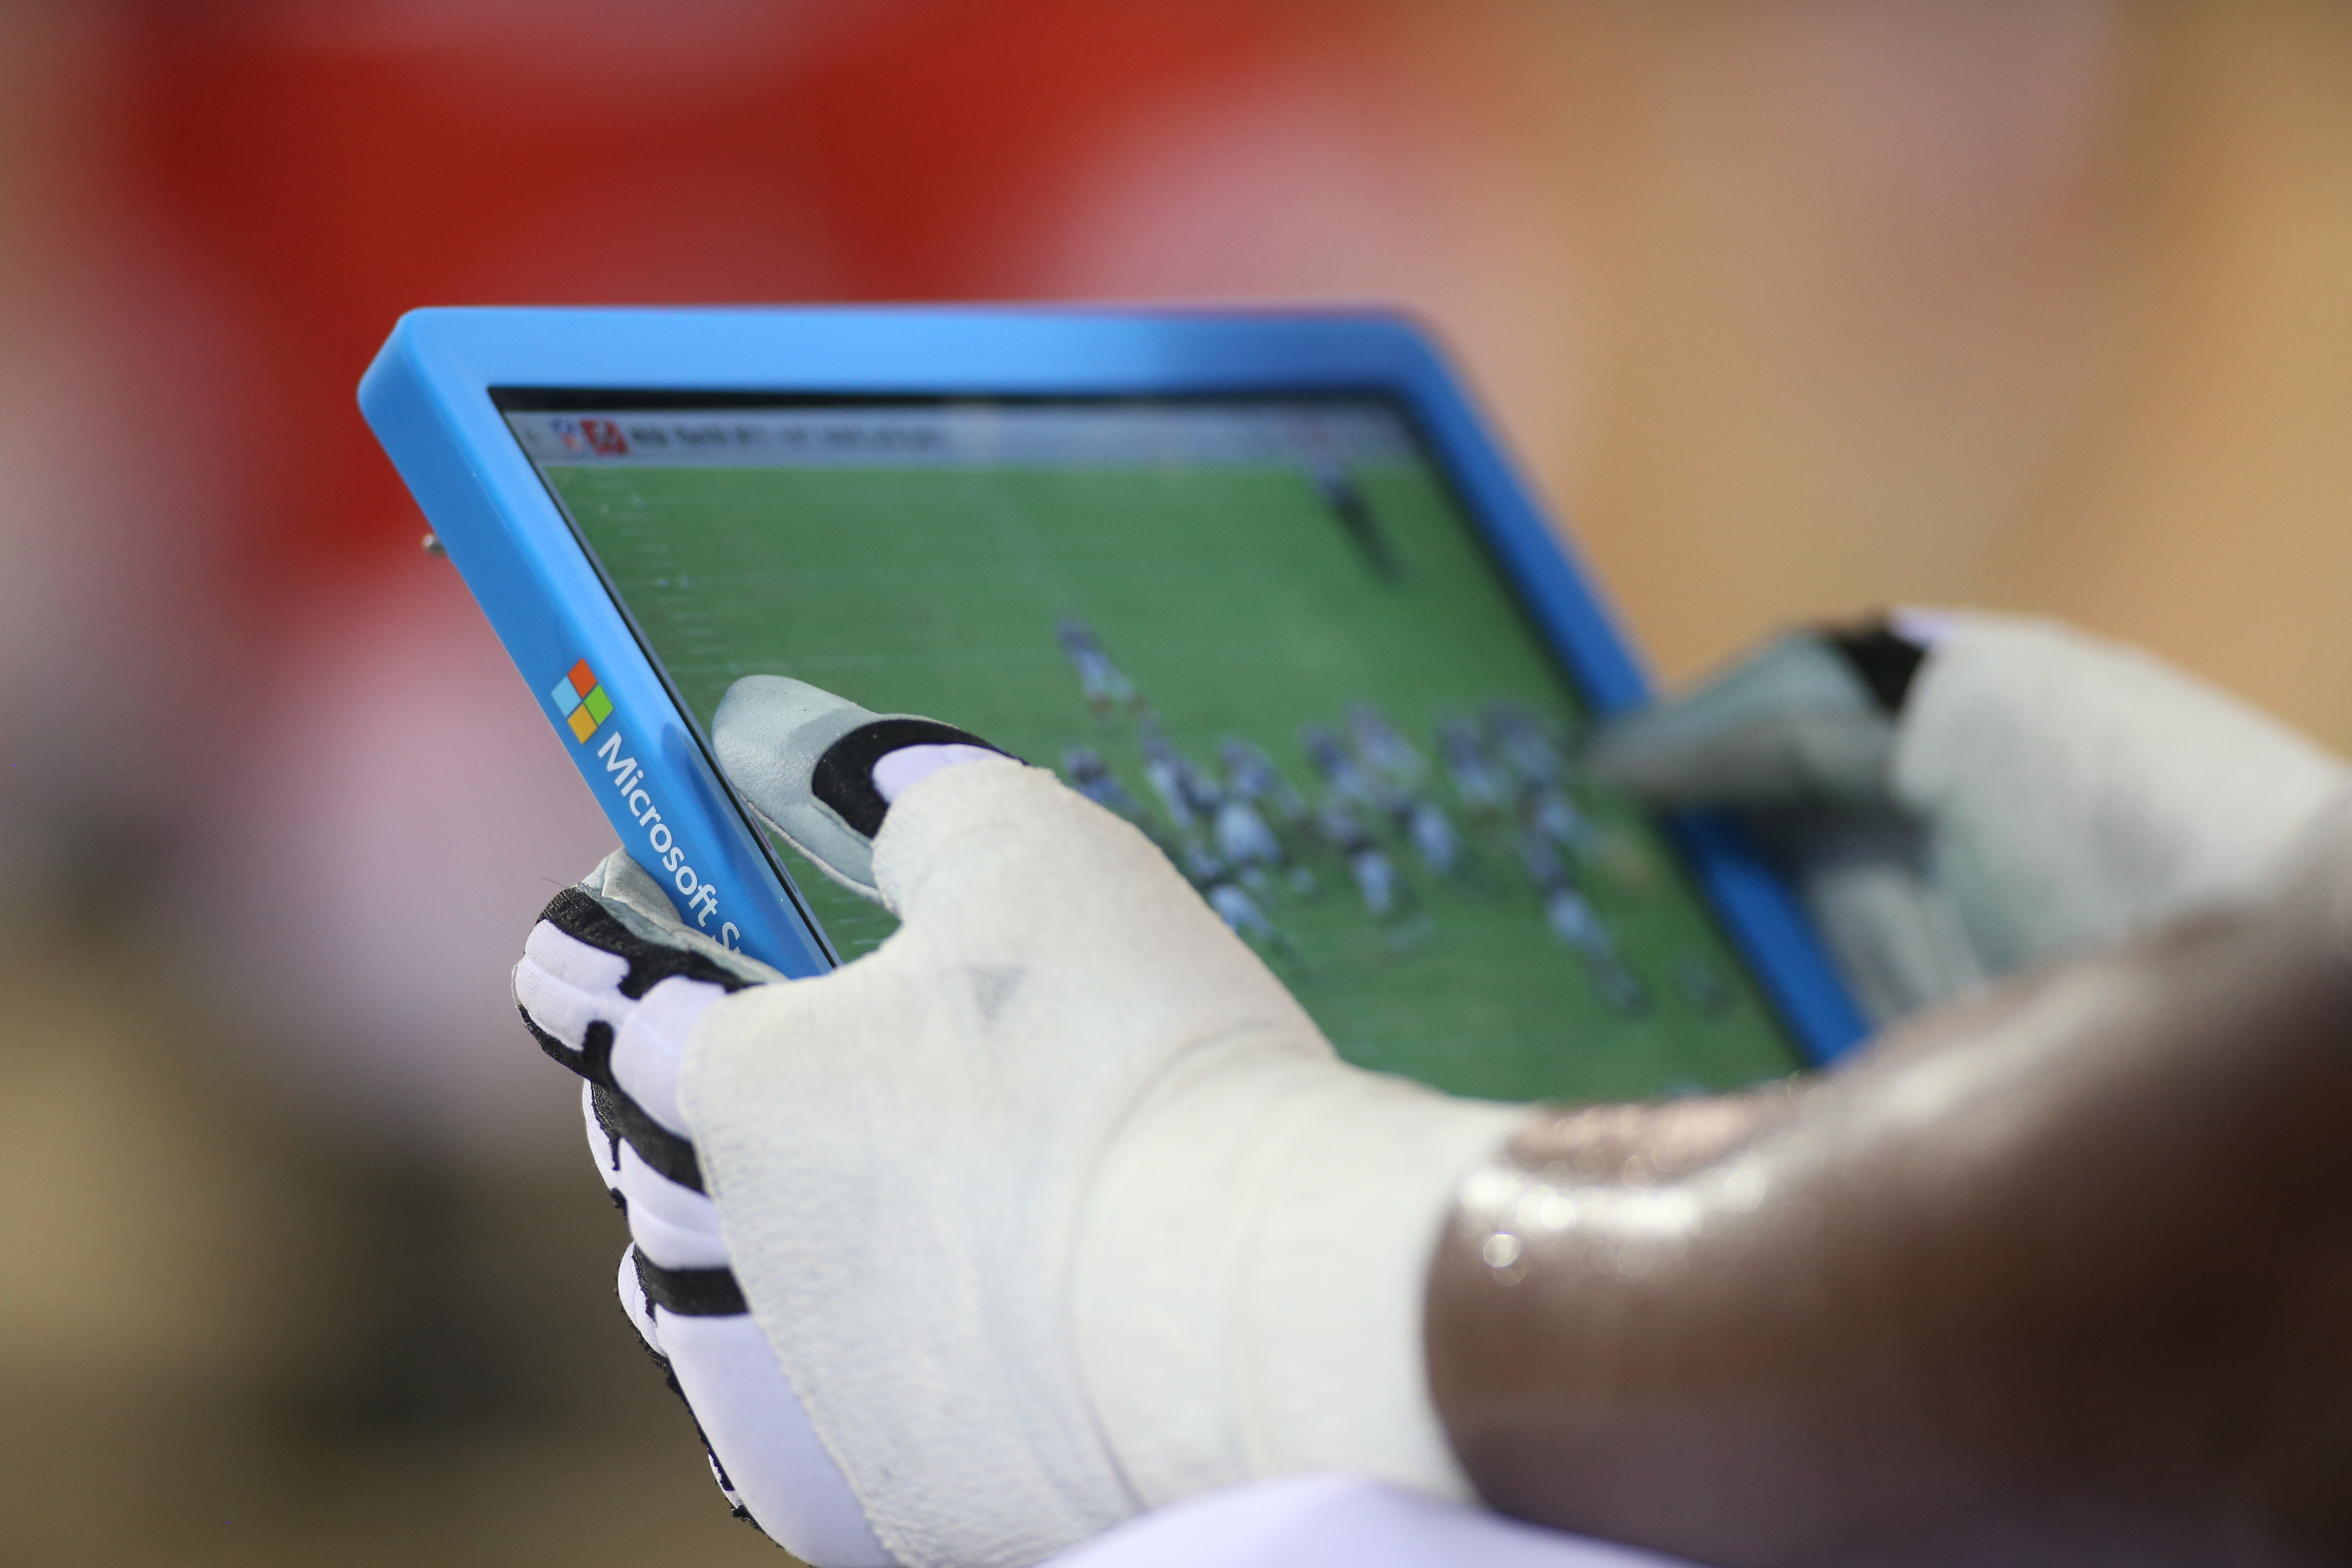 Close-up of a Surface tablet in a player's hands watching a play